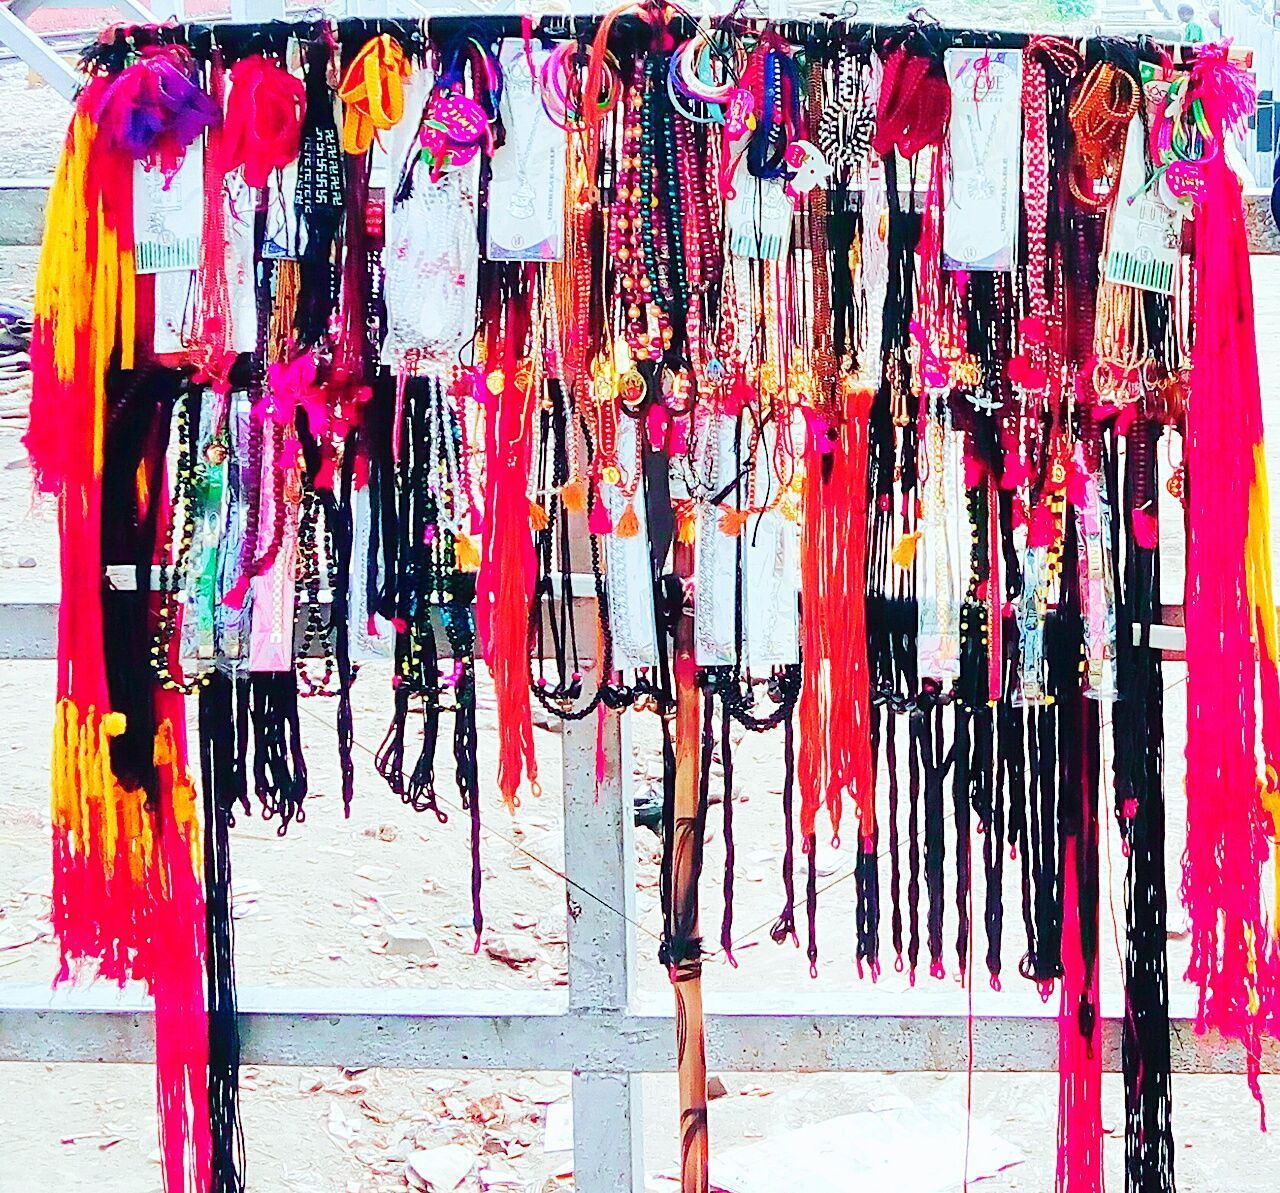 MULTI COLORED DECORATIONS HANGING AT MARKET STALL